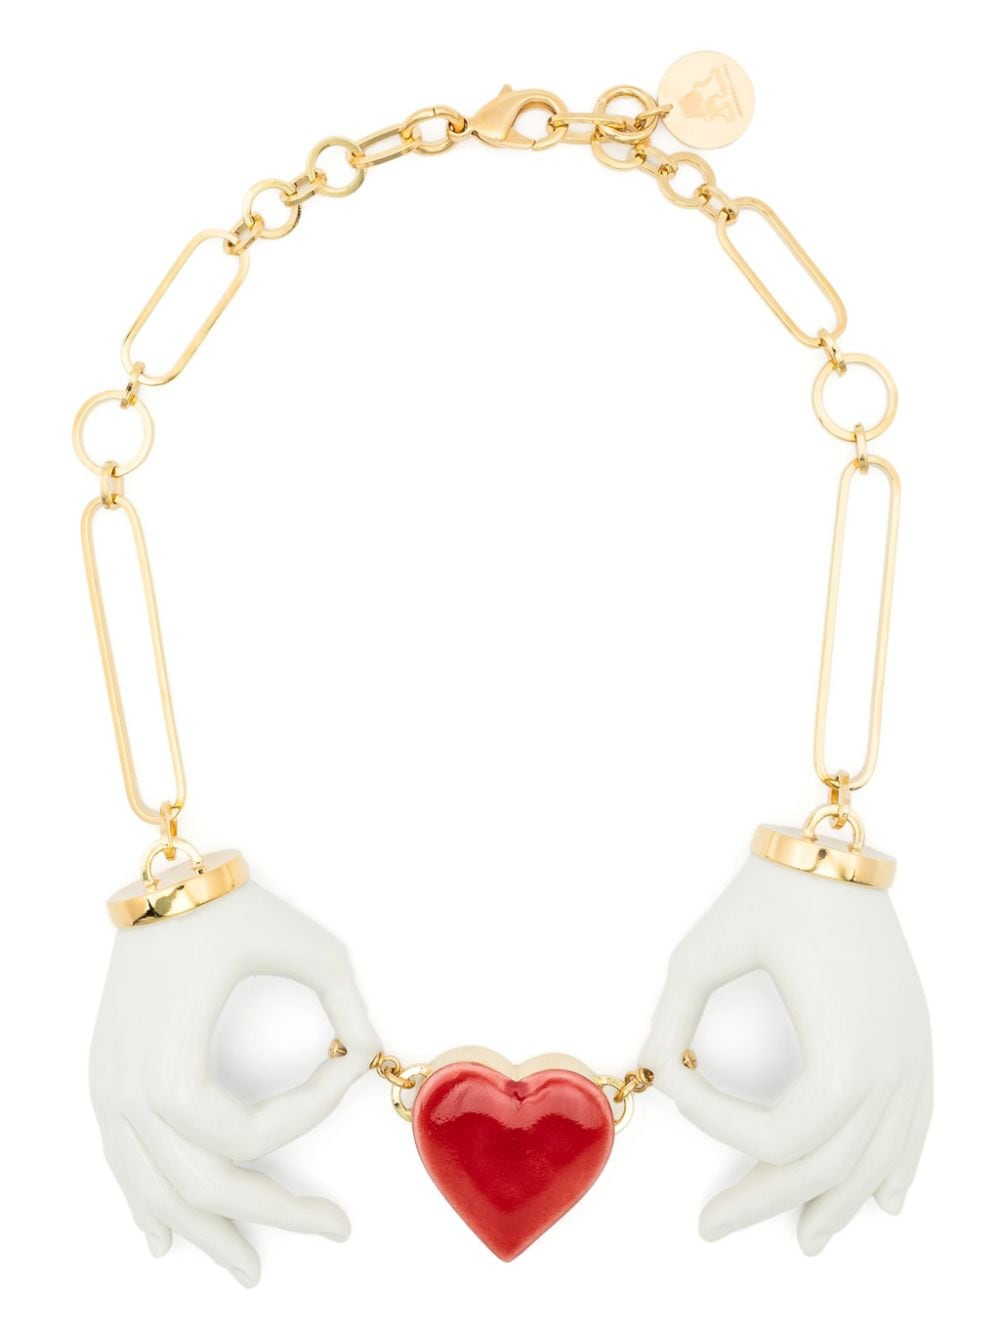 Andres Gallardo Heart Couple Hands Necklace In White